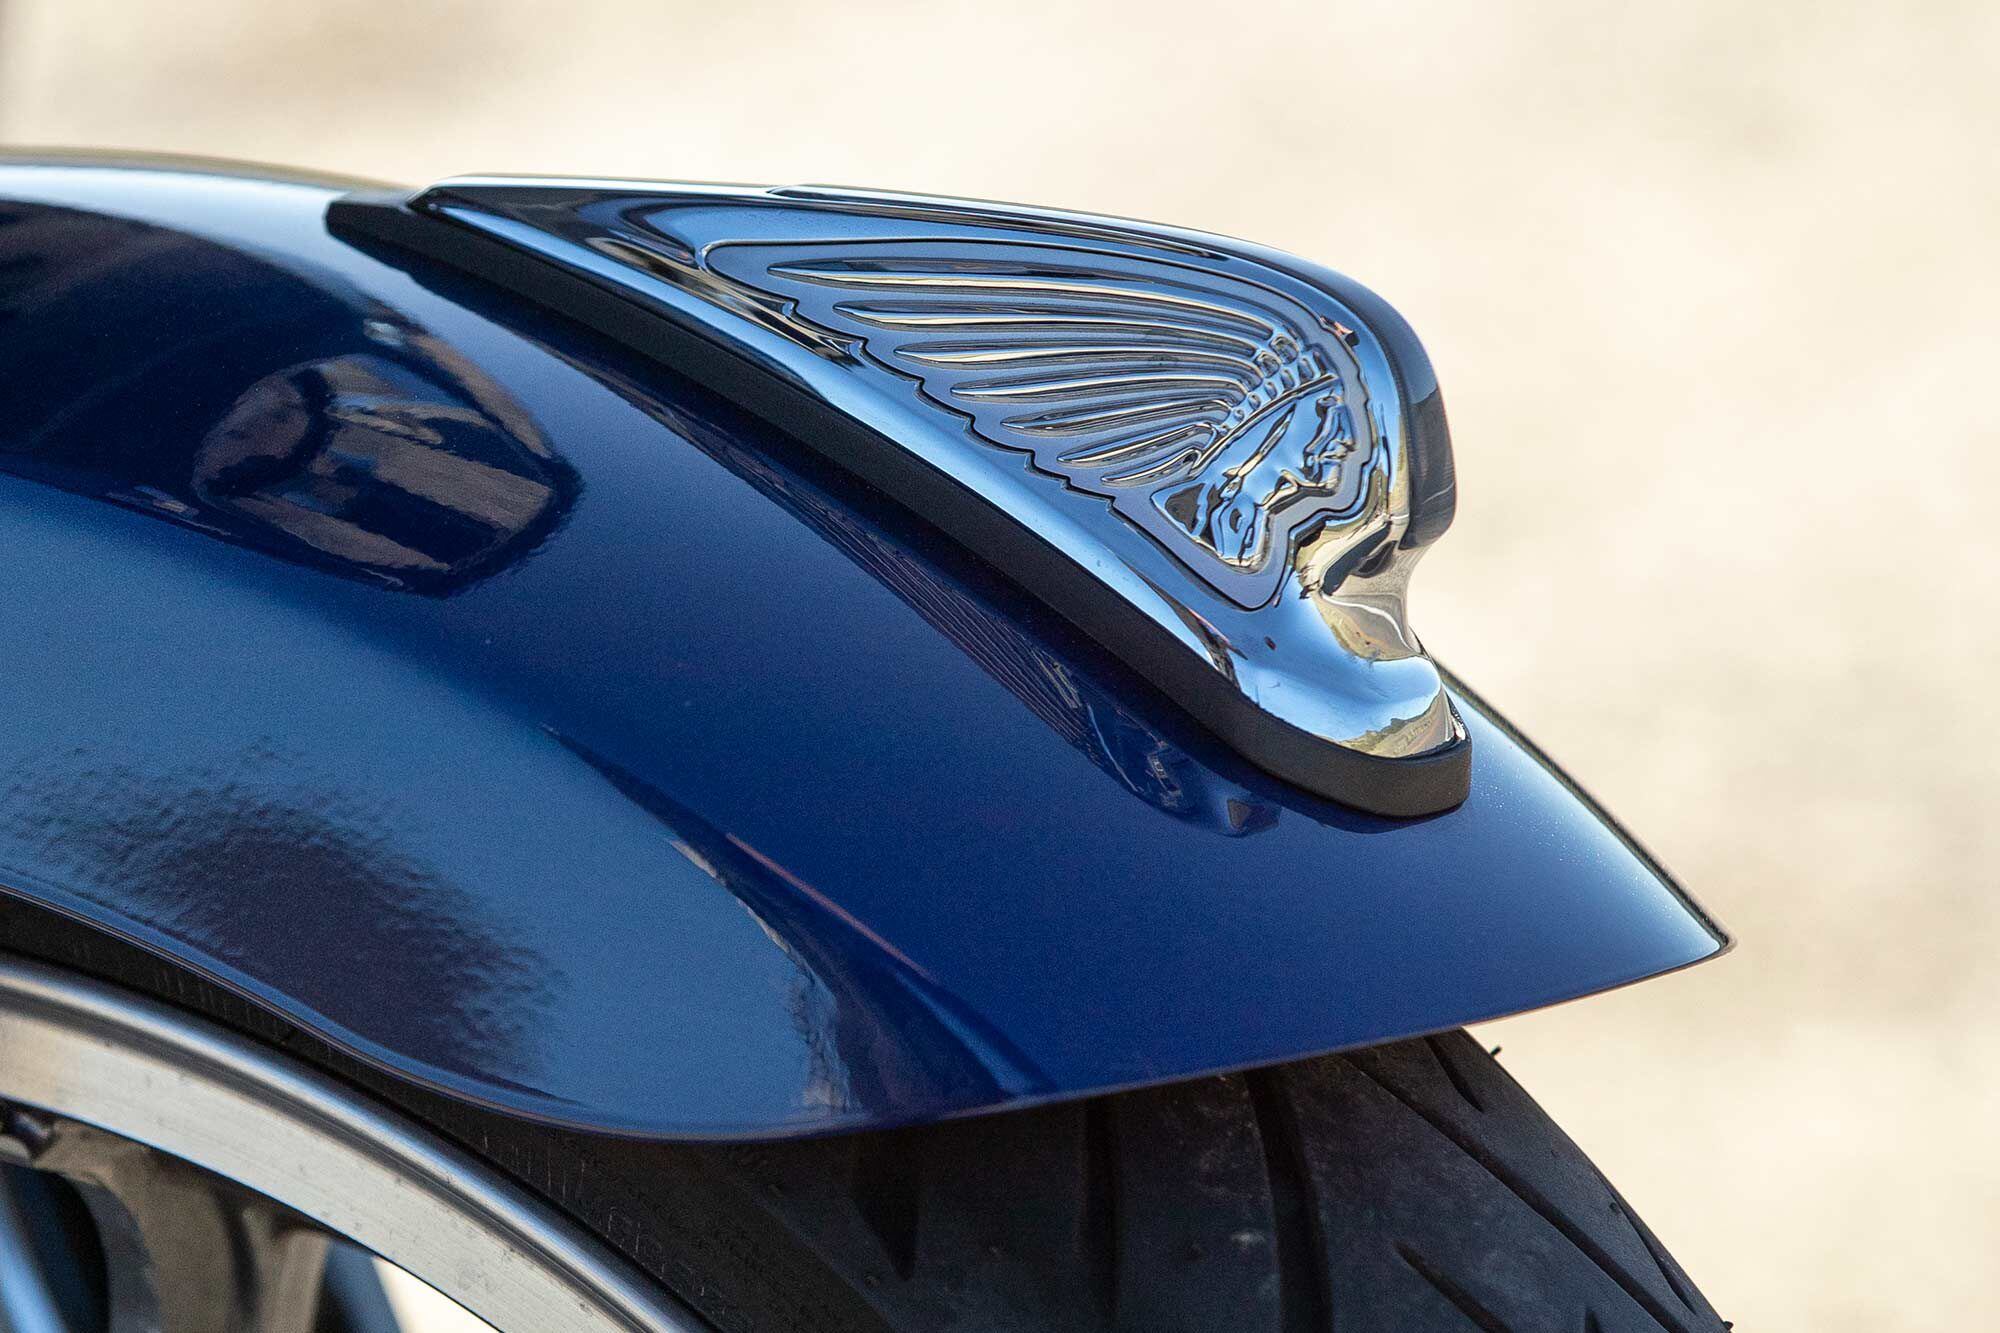 Indian’s fender-mounted headdress has grown smaller over the years, but remains a symbol of the brand’s historic design.